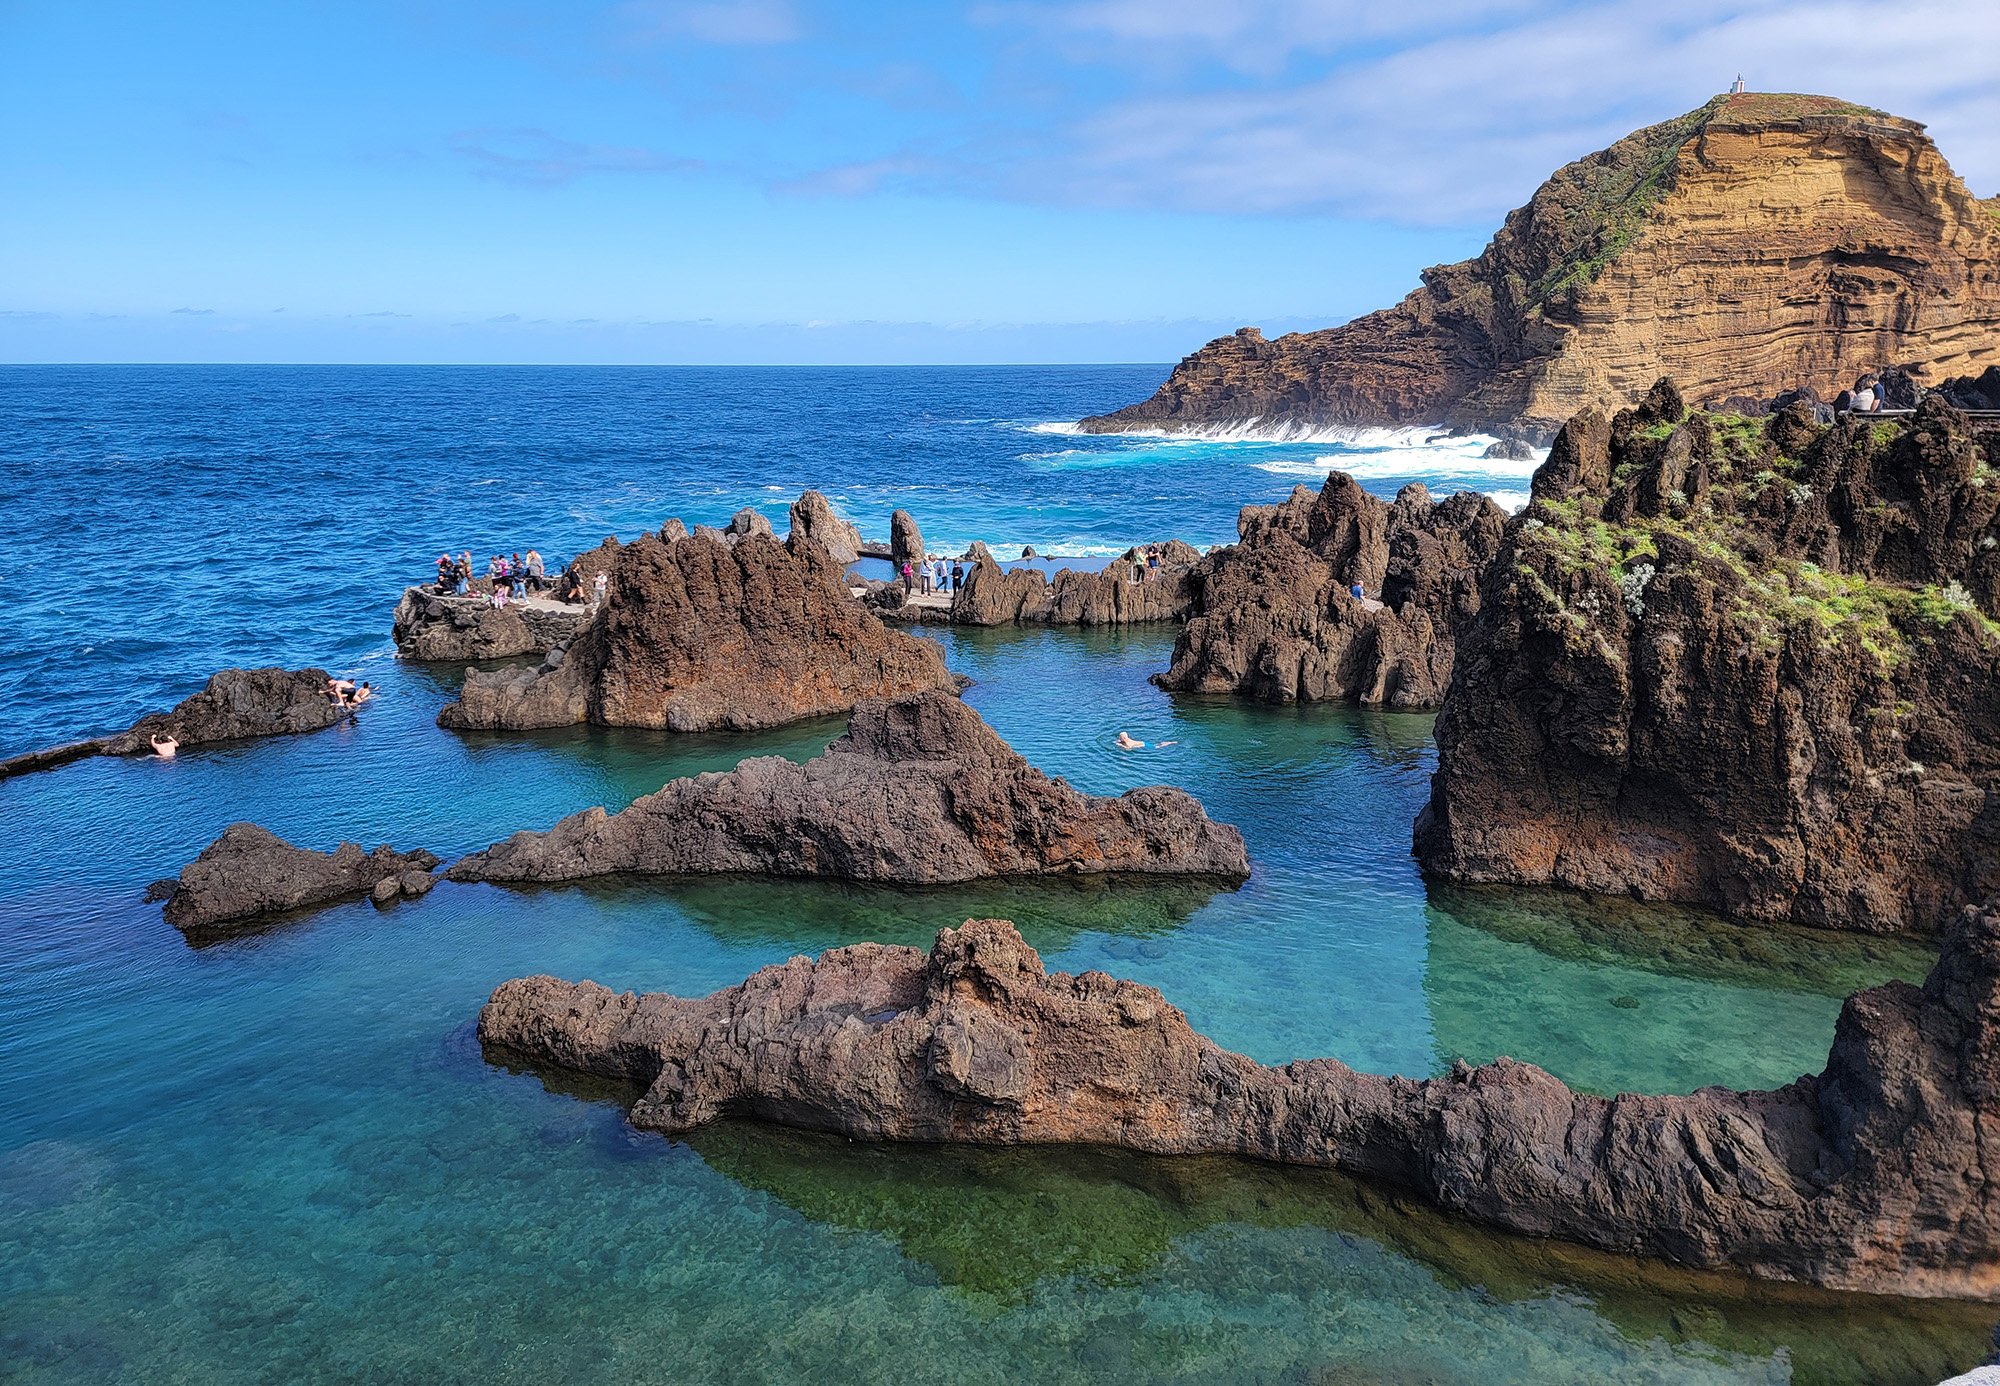 Many places on Madeira have these natural rock pools you can swim in, if you can tolerate the cold waters... 